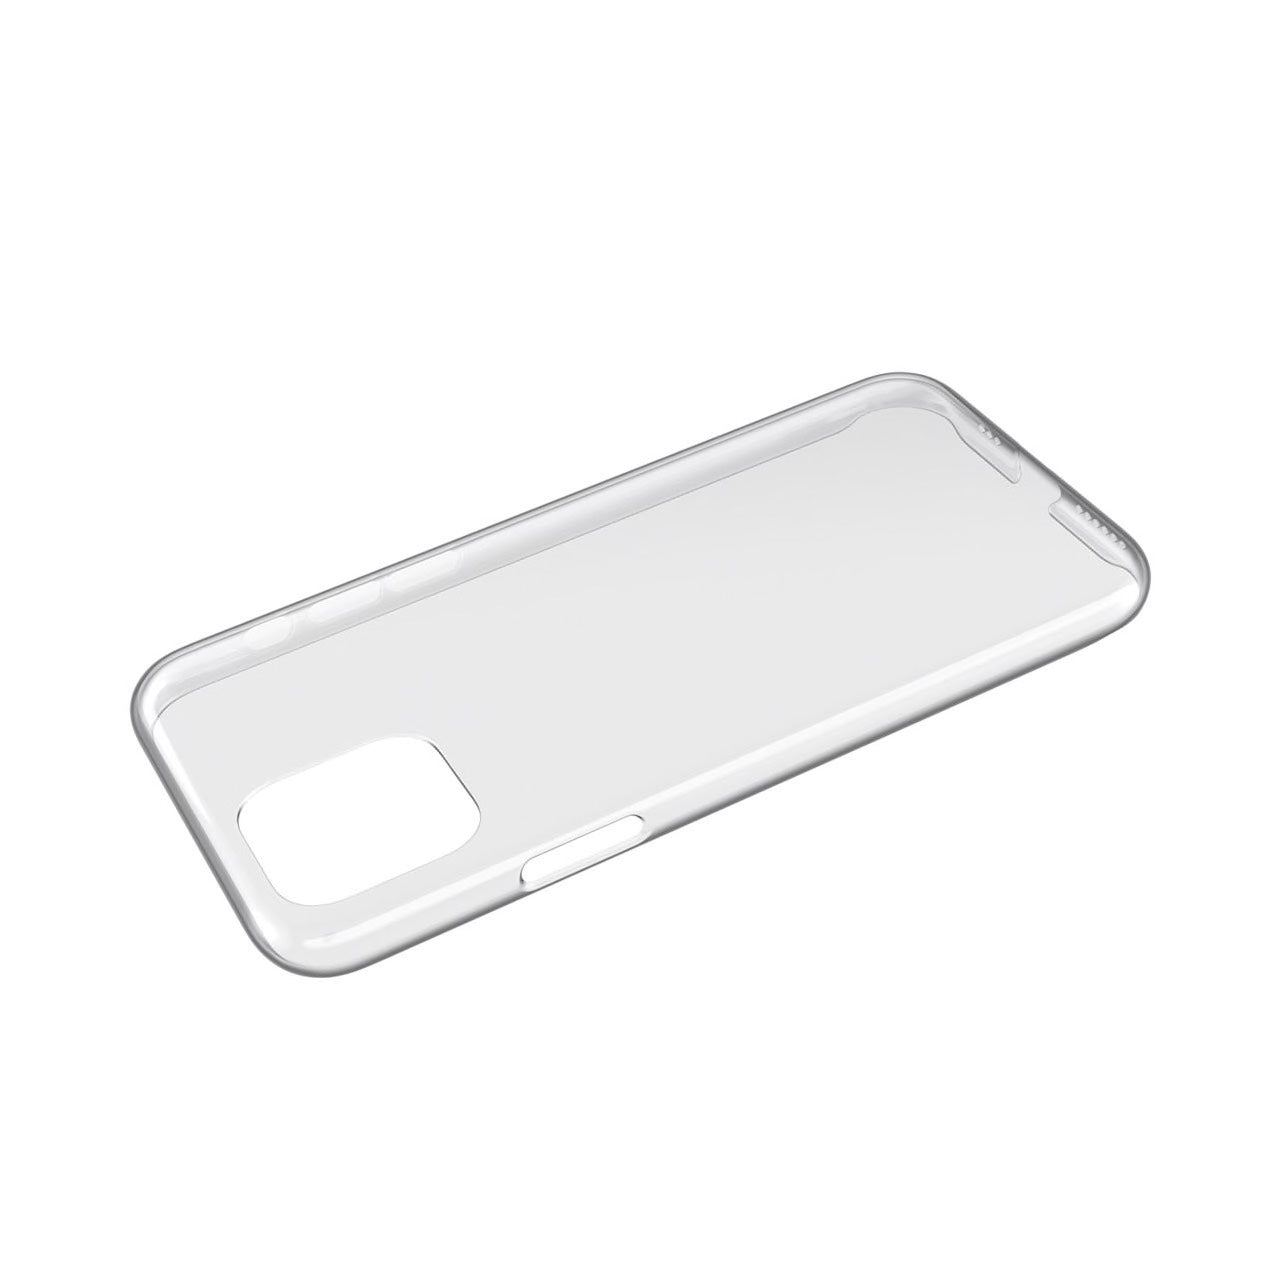 Air Jacket for iPhone 11 Pro - Clear